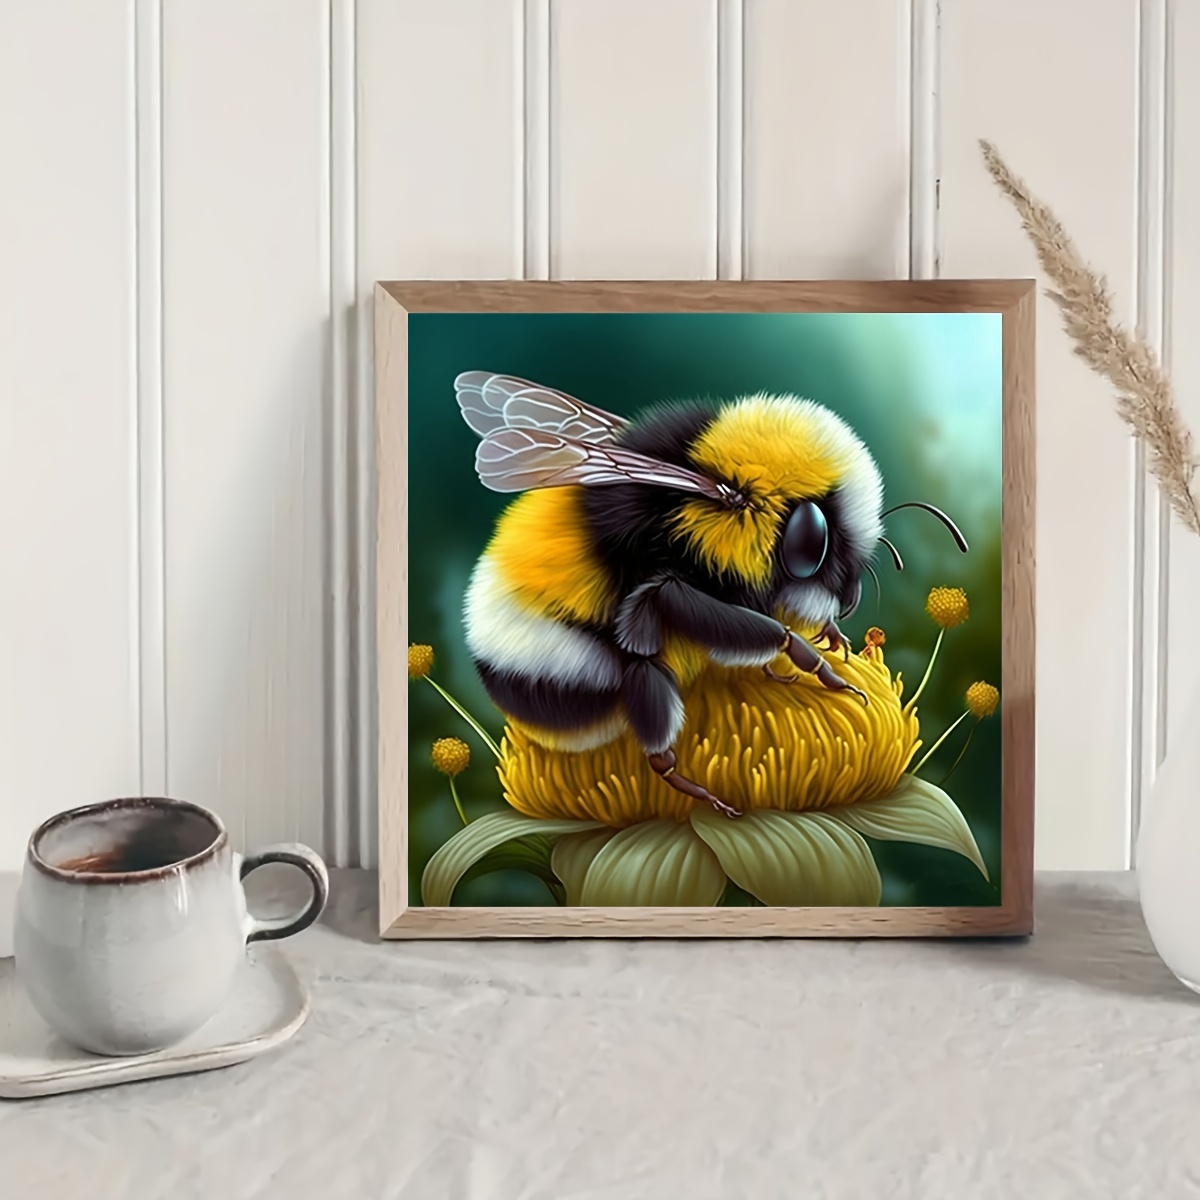  NAIMOER Bee Diamond Painting Kits for Adults, Bees and